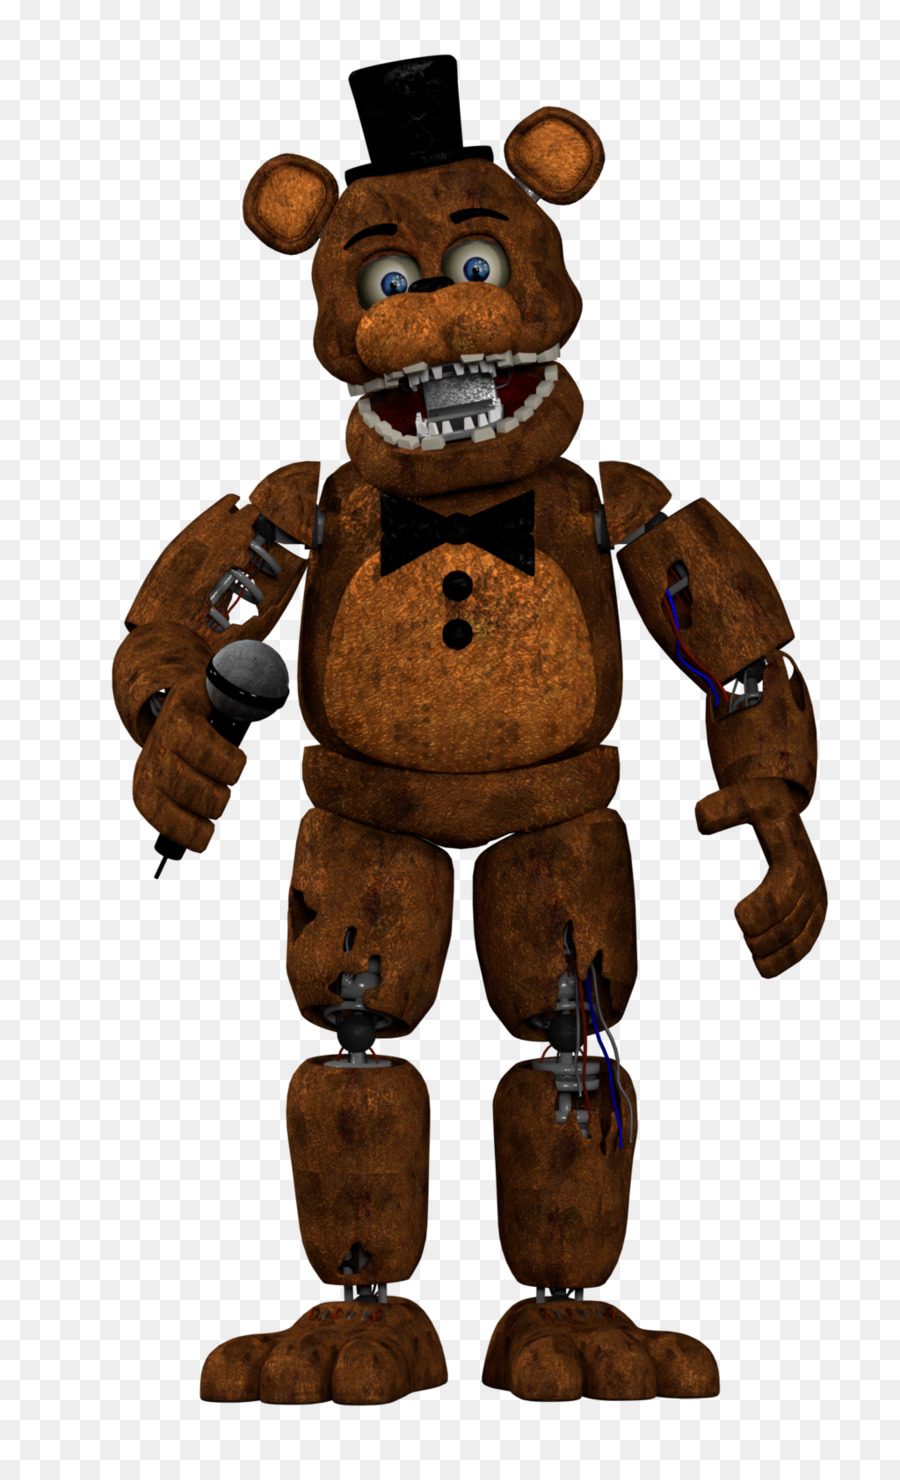 Kisspng Five Nights At Freddy S 2 Five Nights At Freddy S Withered Leaf 5aeb2766dd84a6.8195891515253604869074 